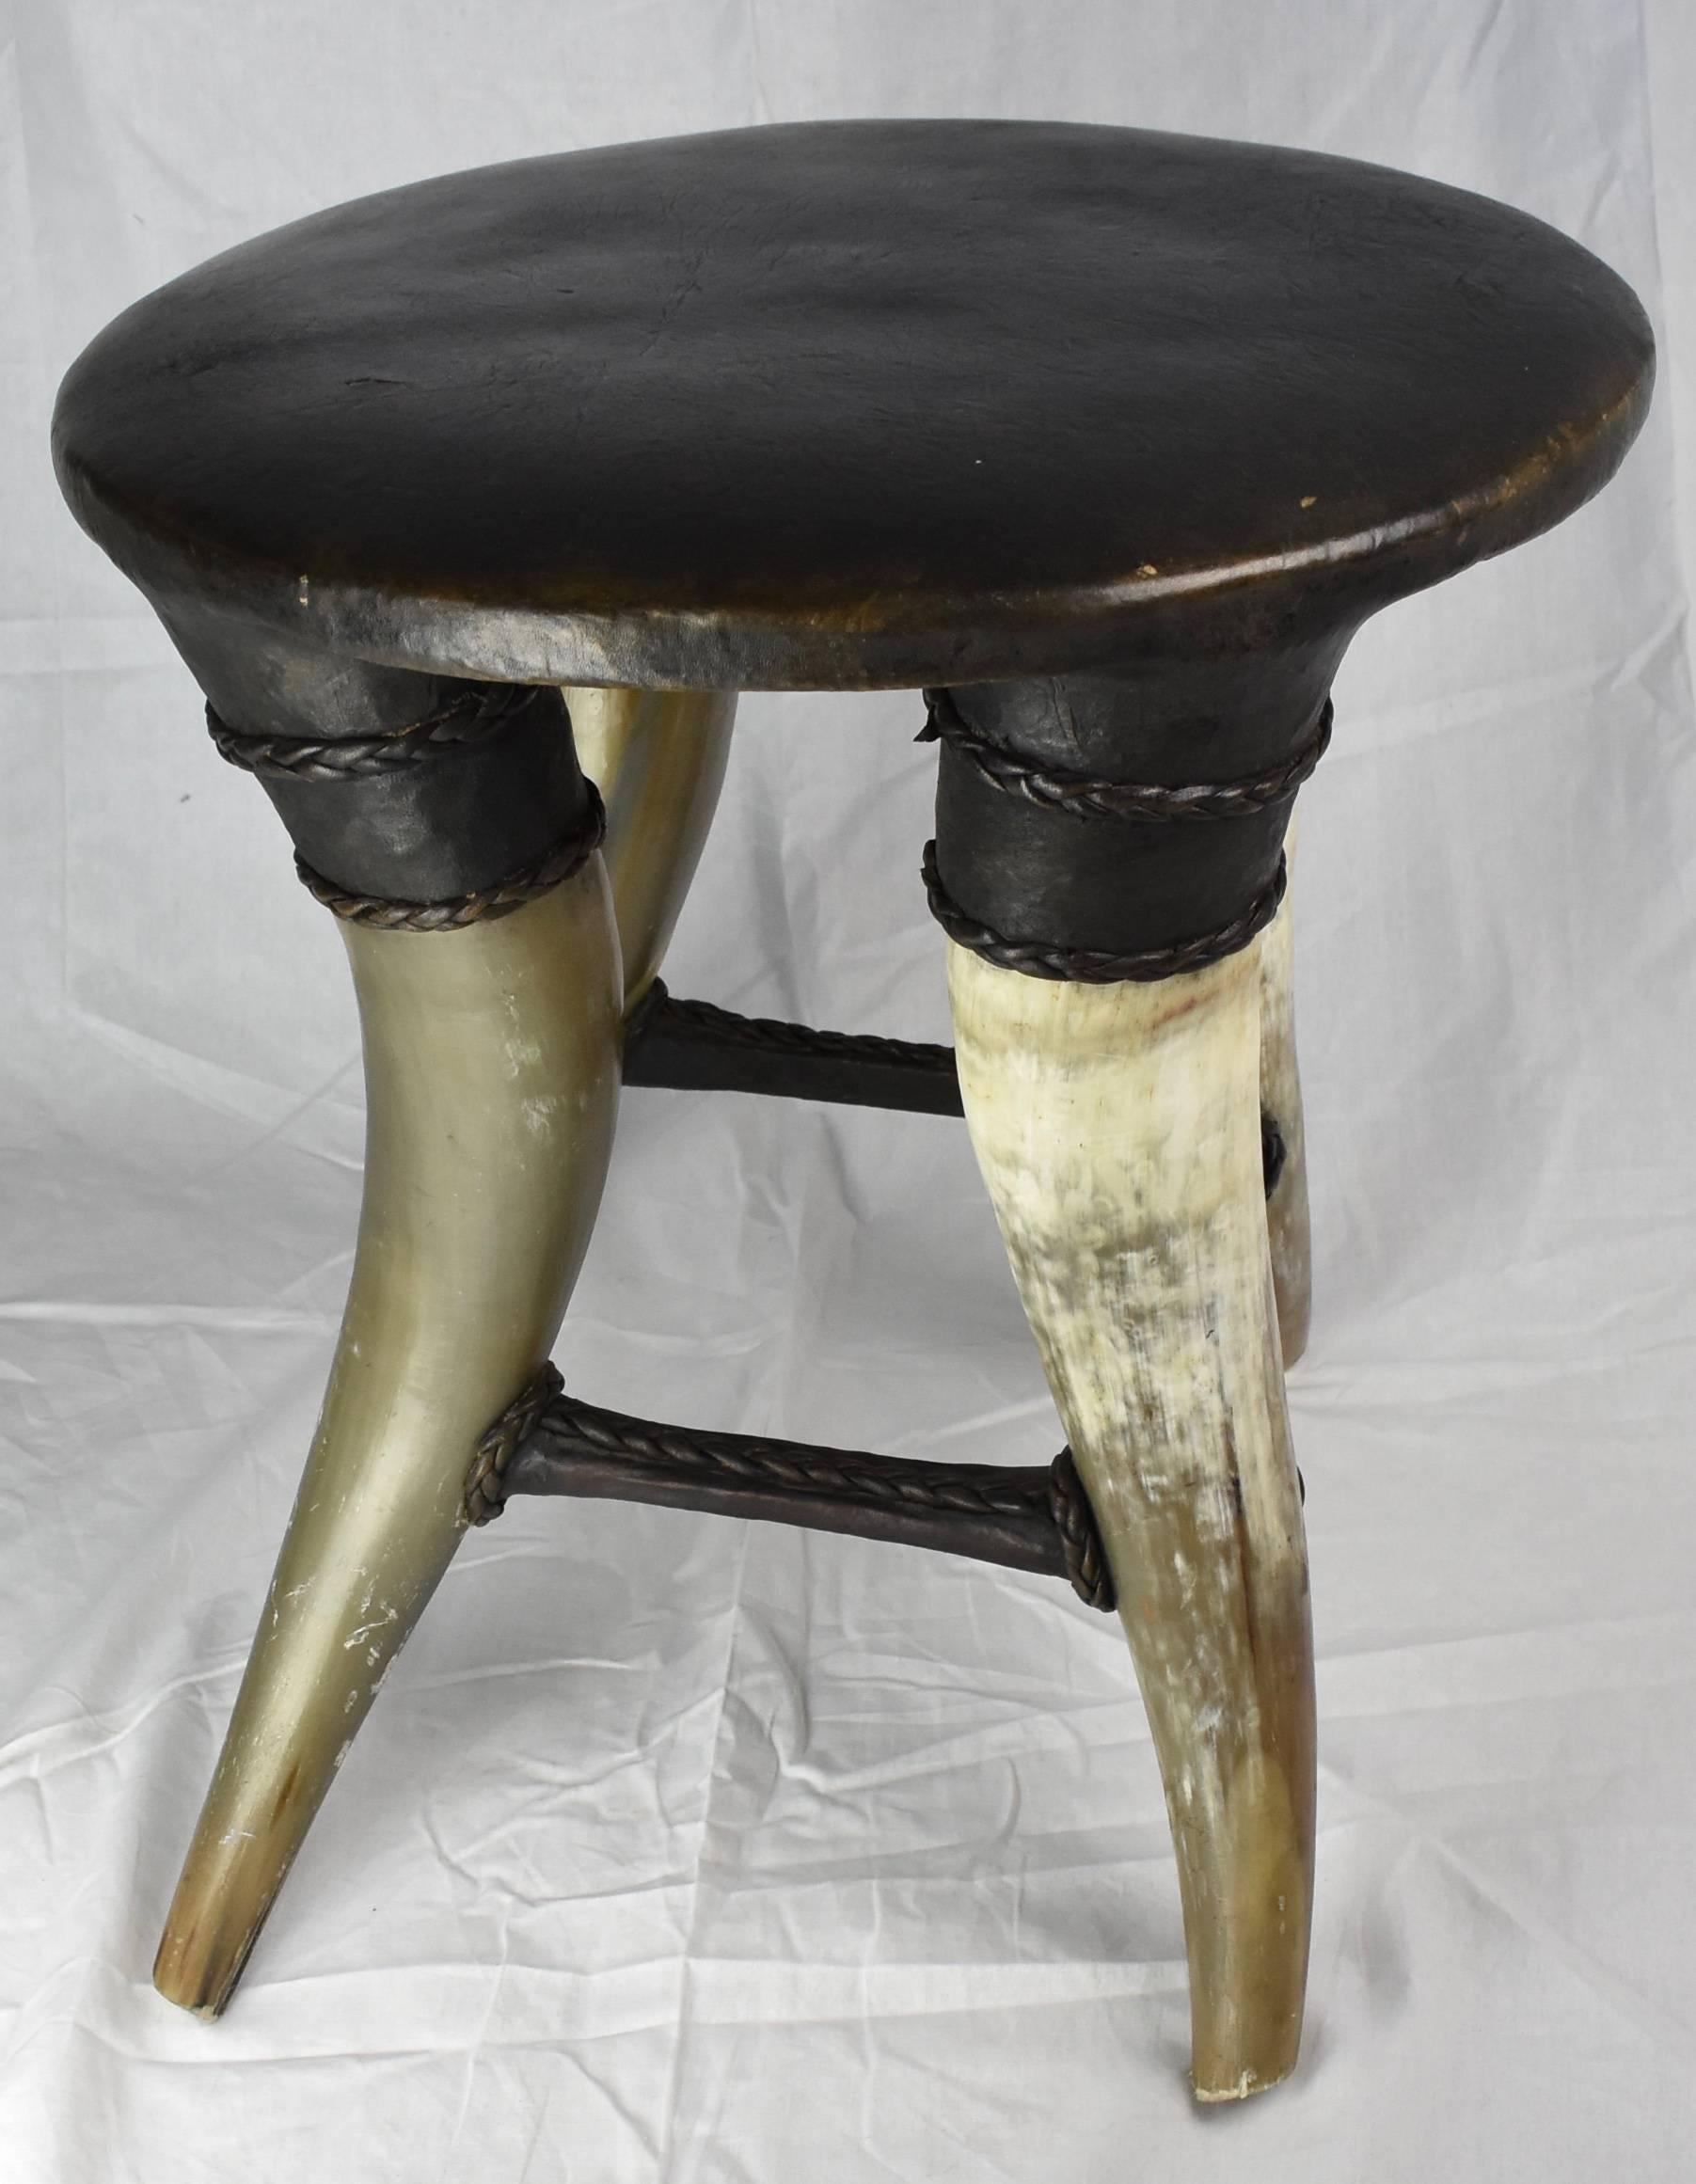 Hand-Crafted Vintage African Horn Stool with Chocolate Brown Leather Upholstery